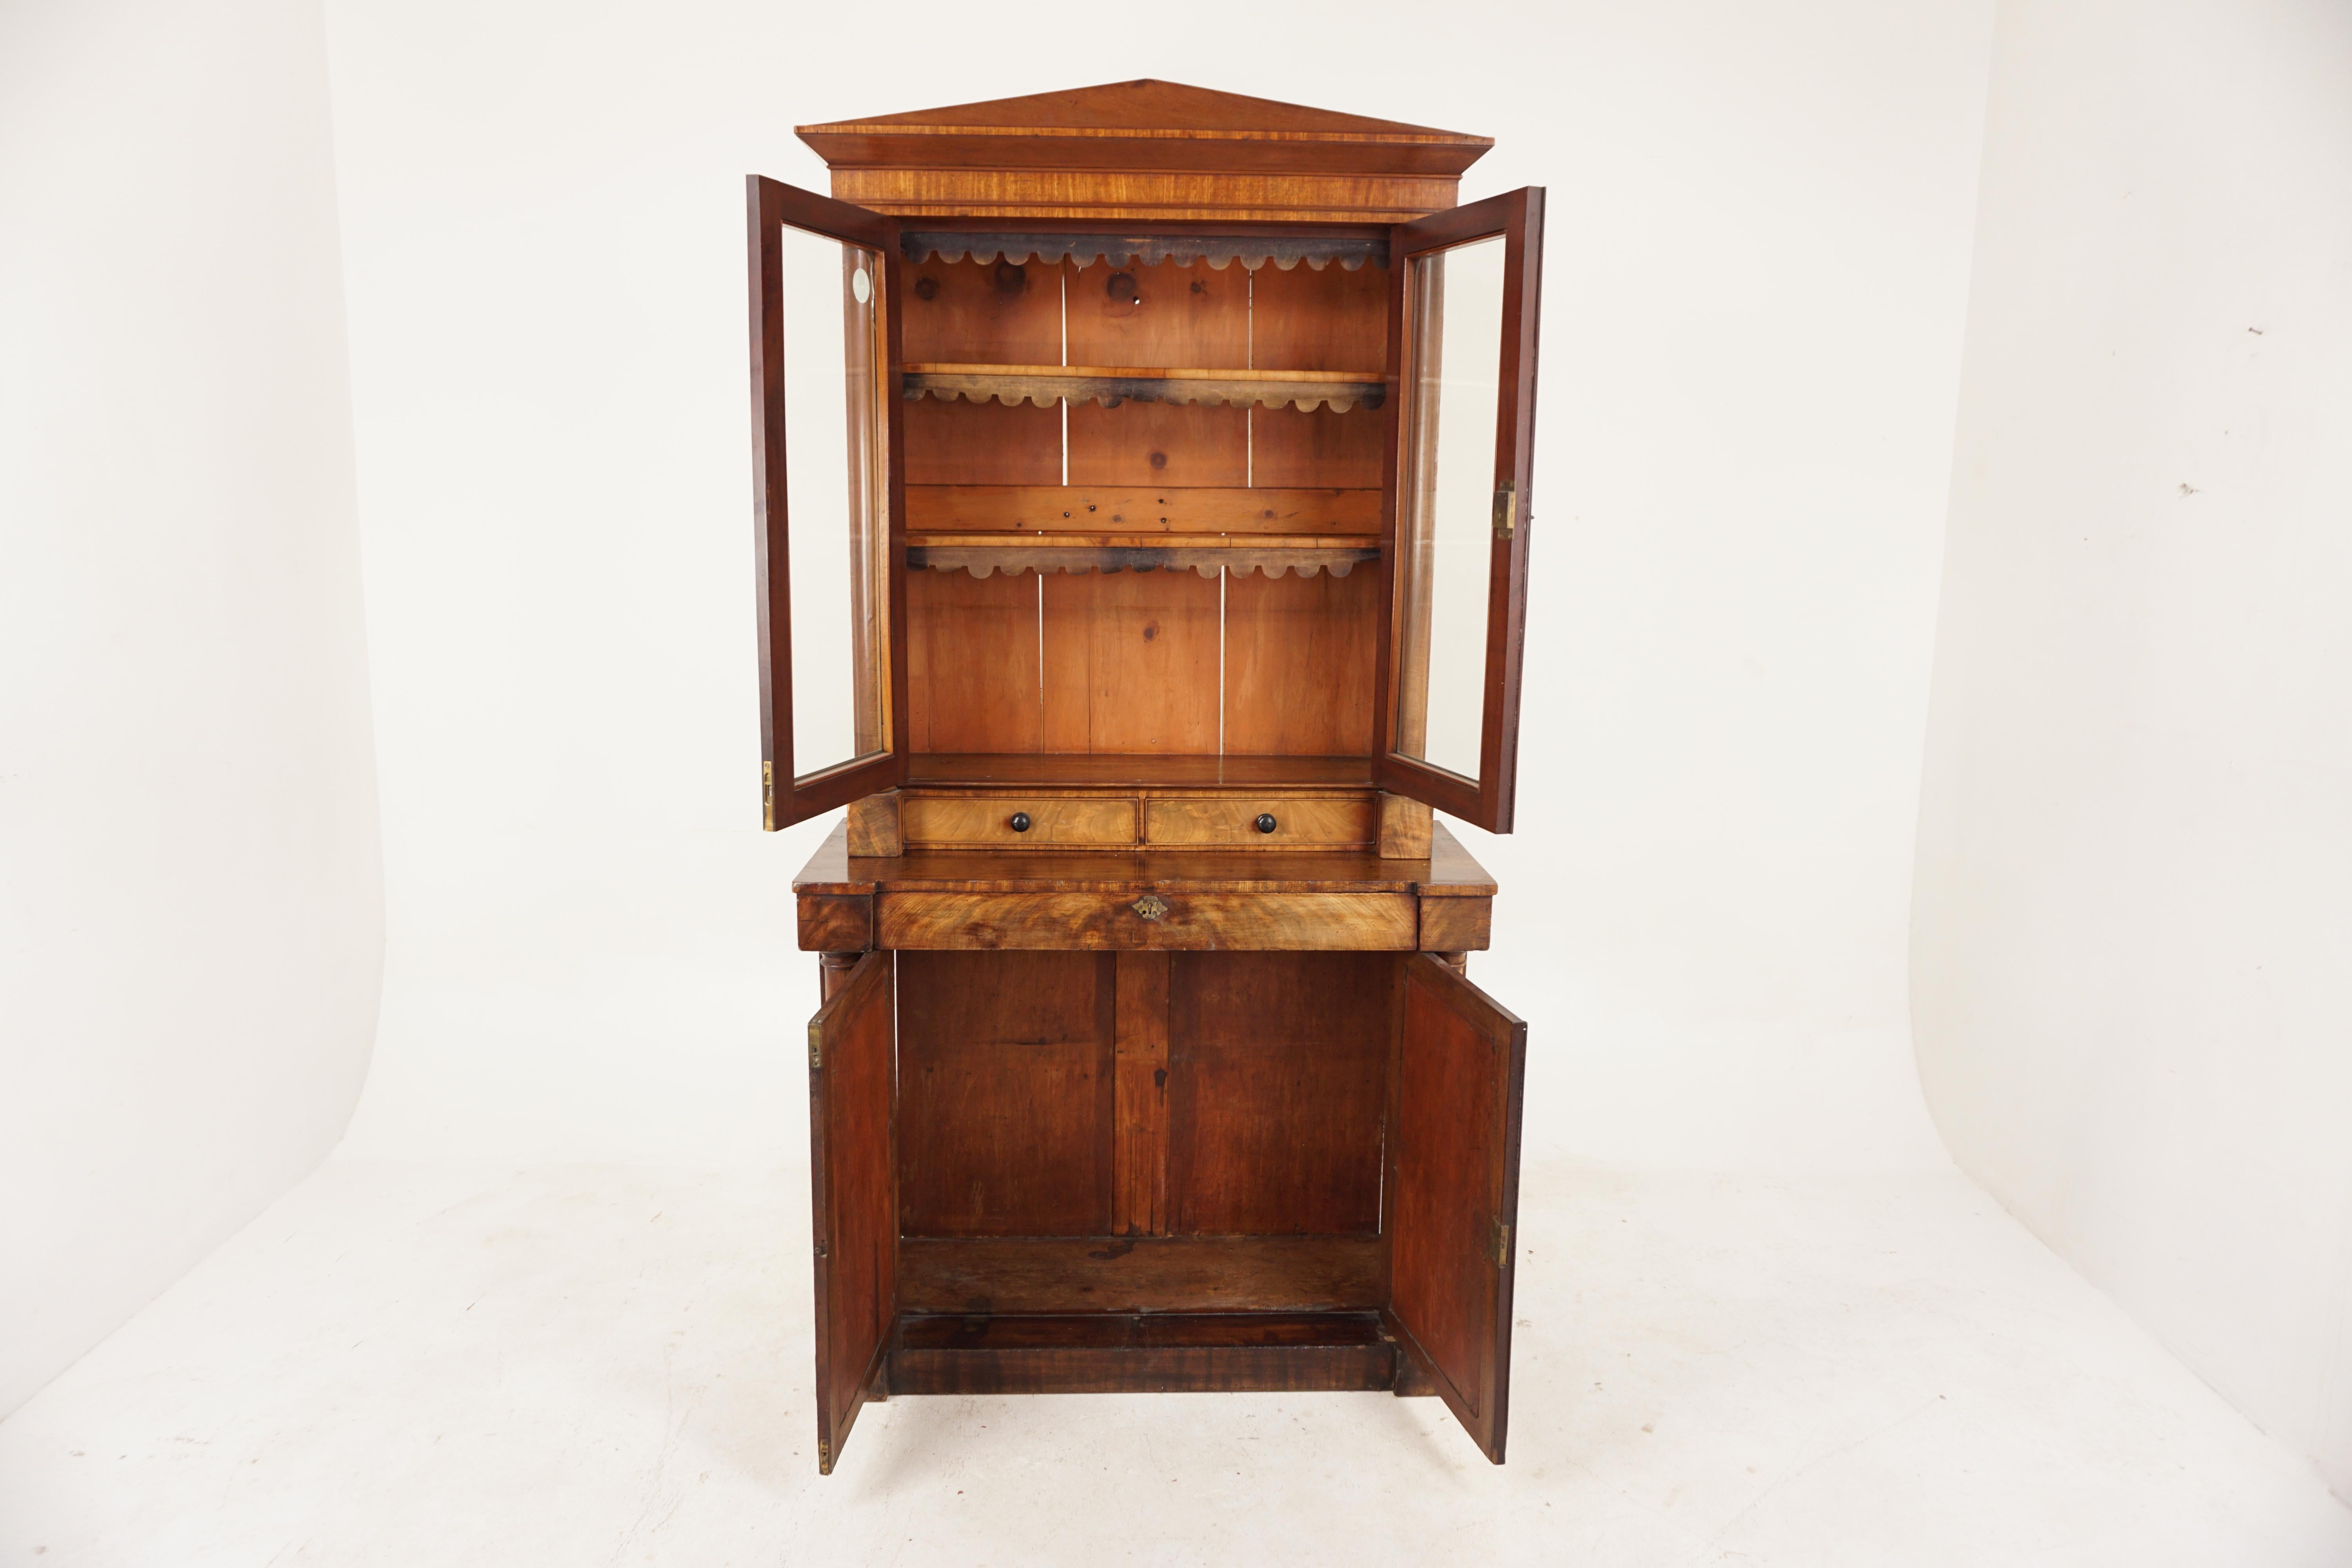 Scottish Antique Victorian Four Door Cabinet Bookcase Display Cabinet For Sale